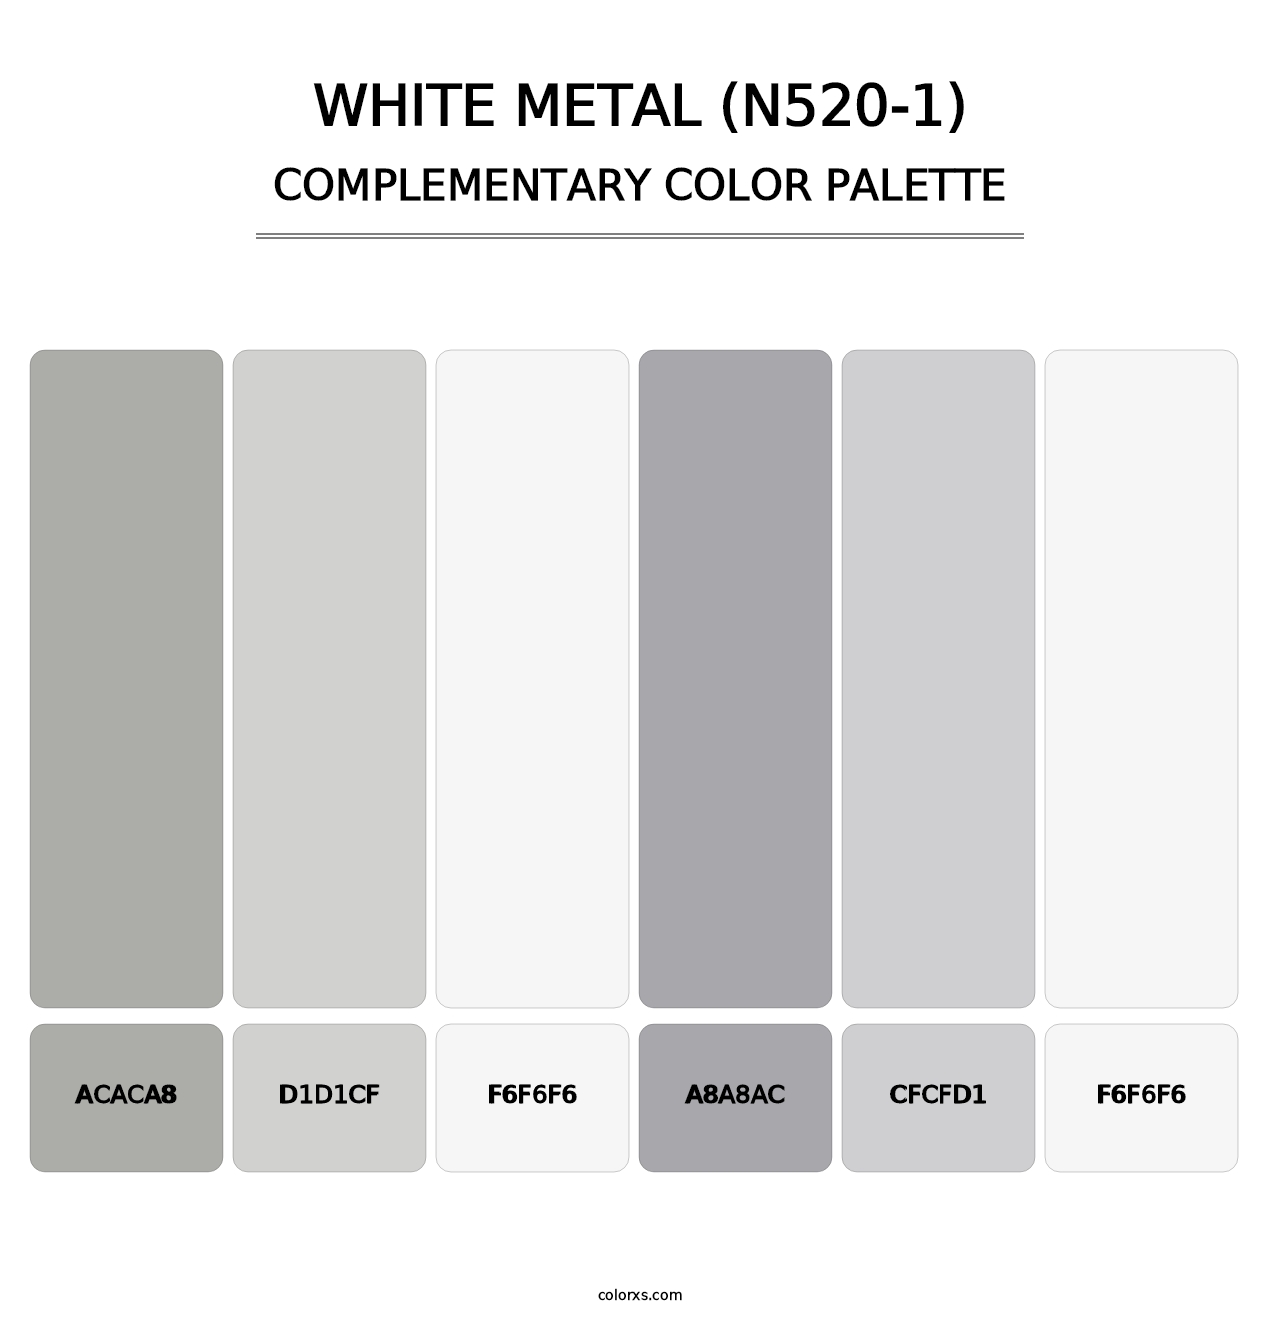 White Metal (N520-1) - Complementary Color Palette